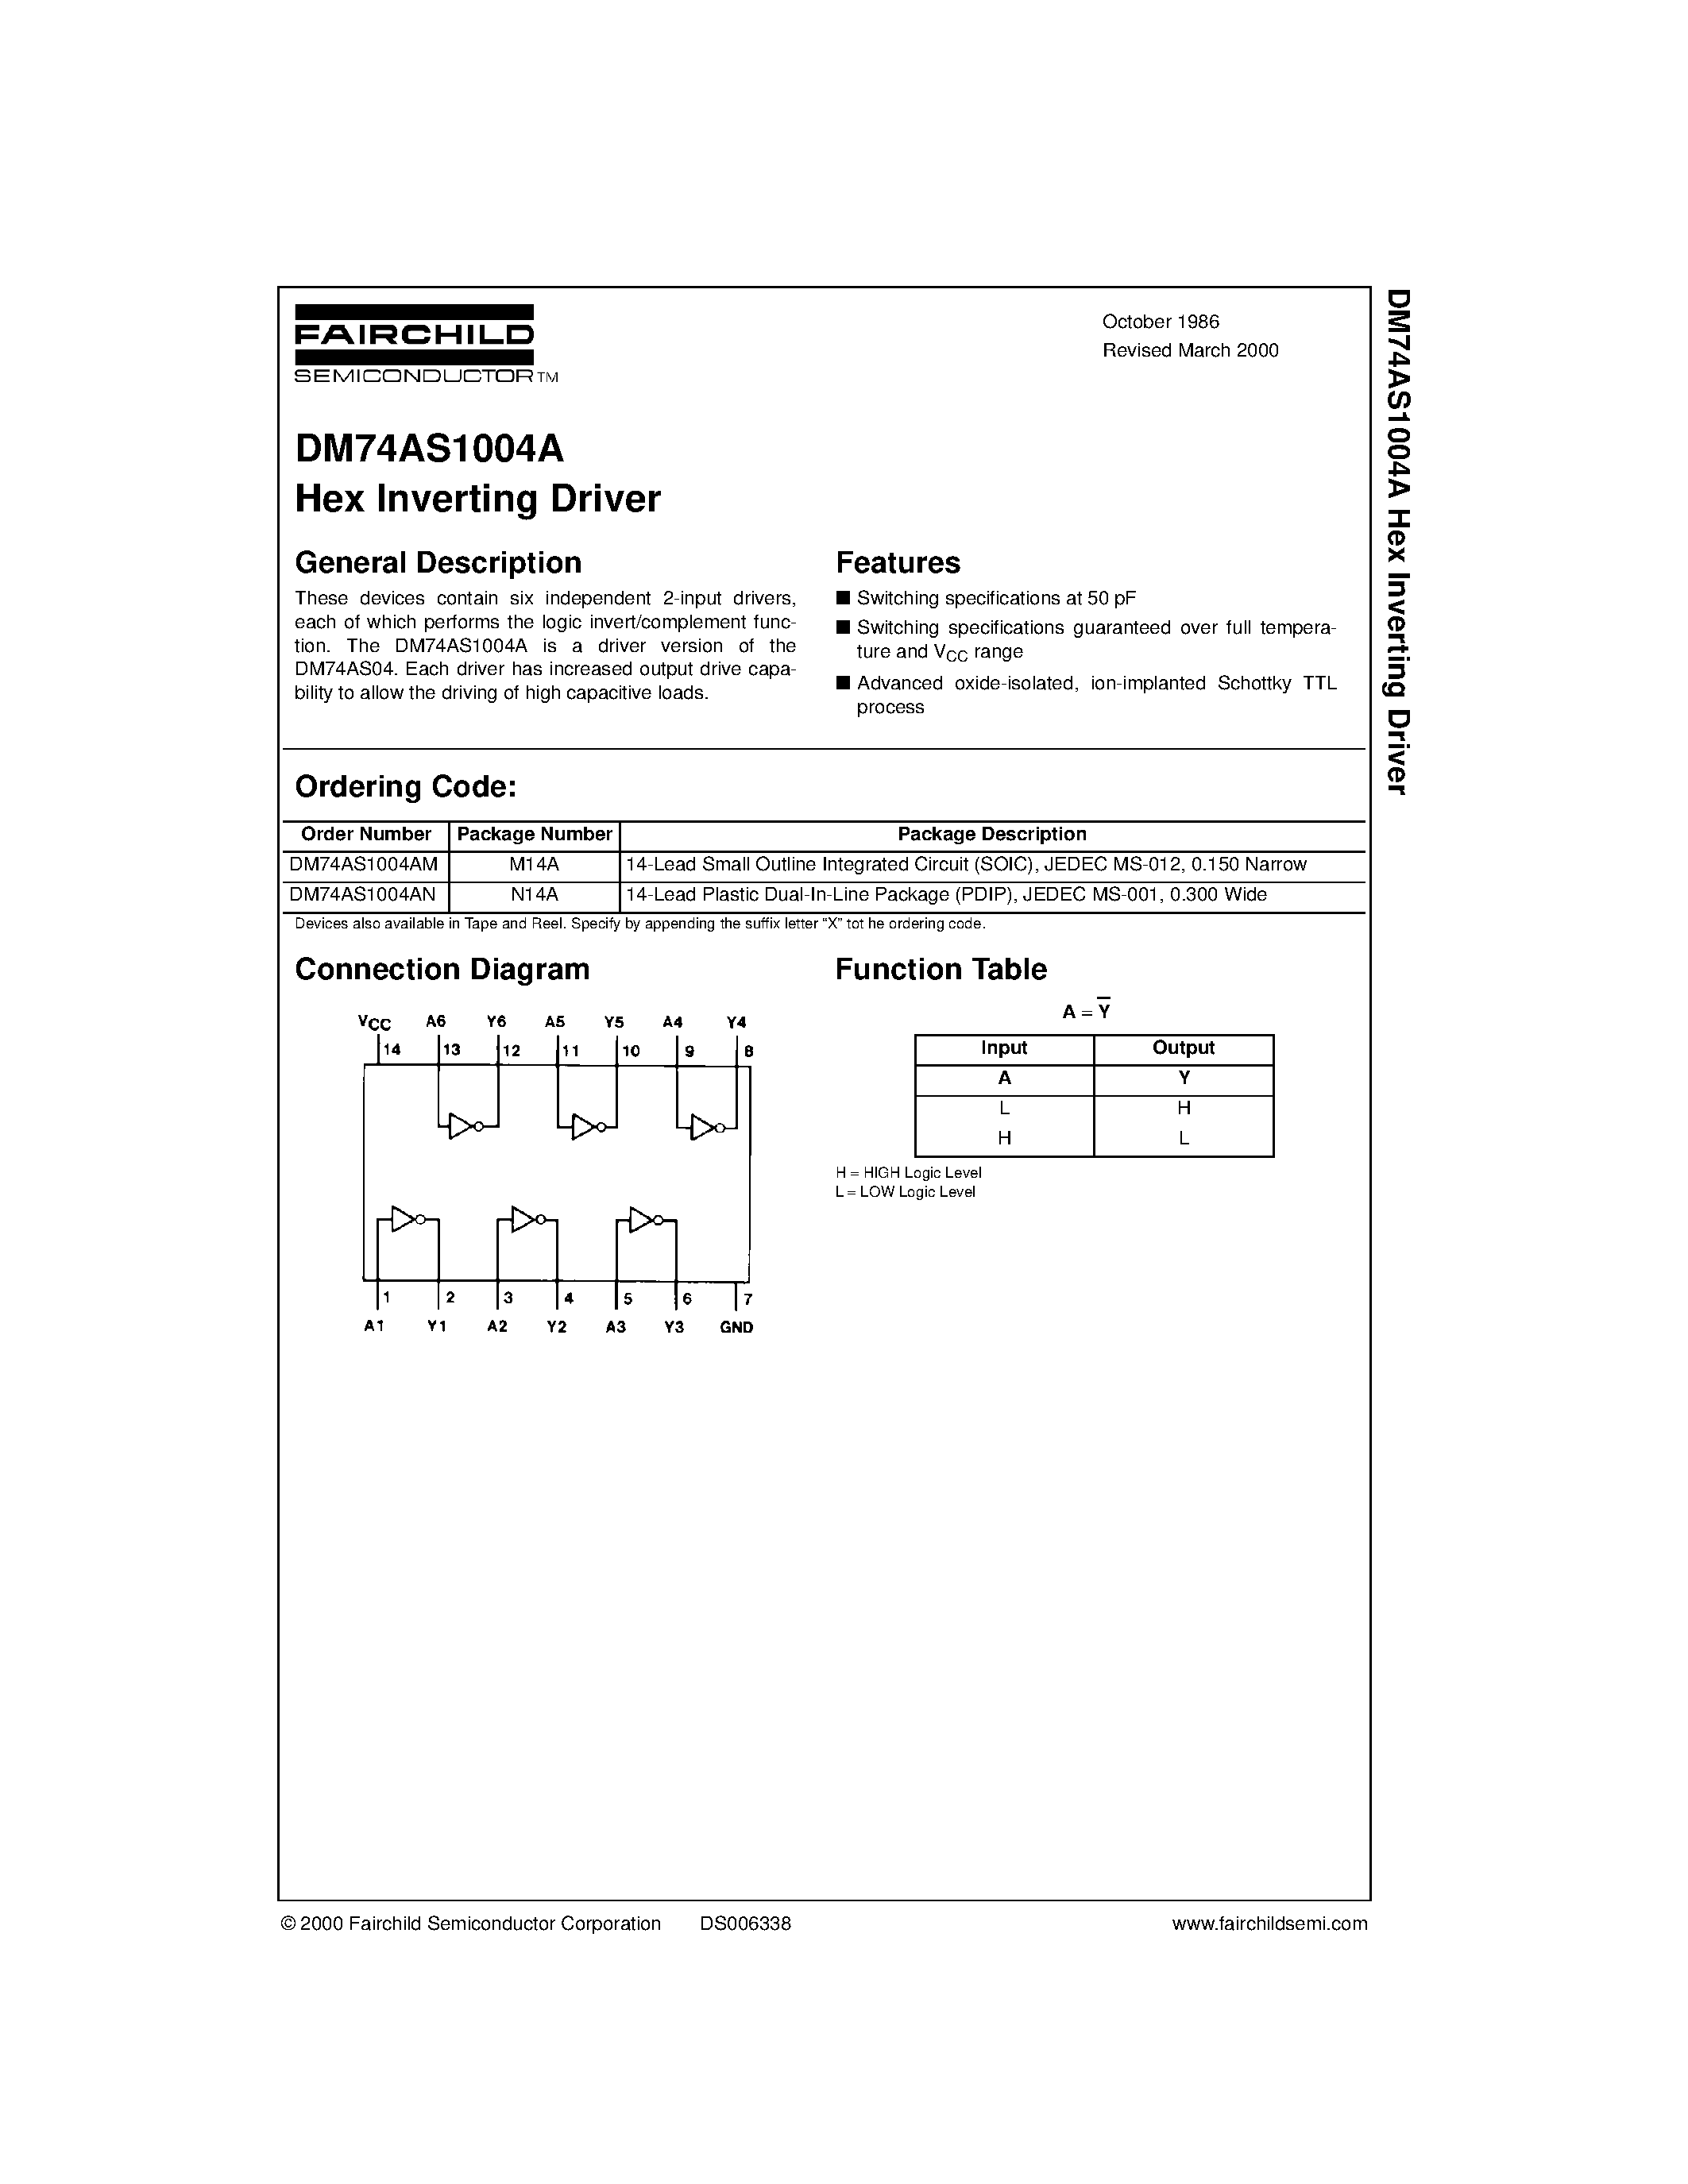 Datasheet DM74AS1004AN - Hex Inverting Driver page 1